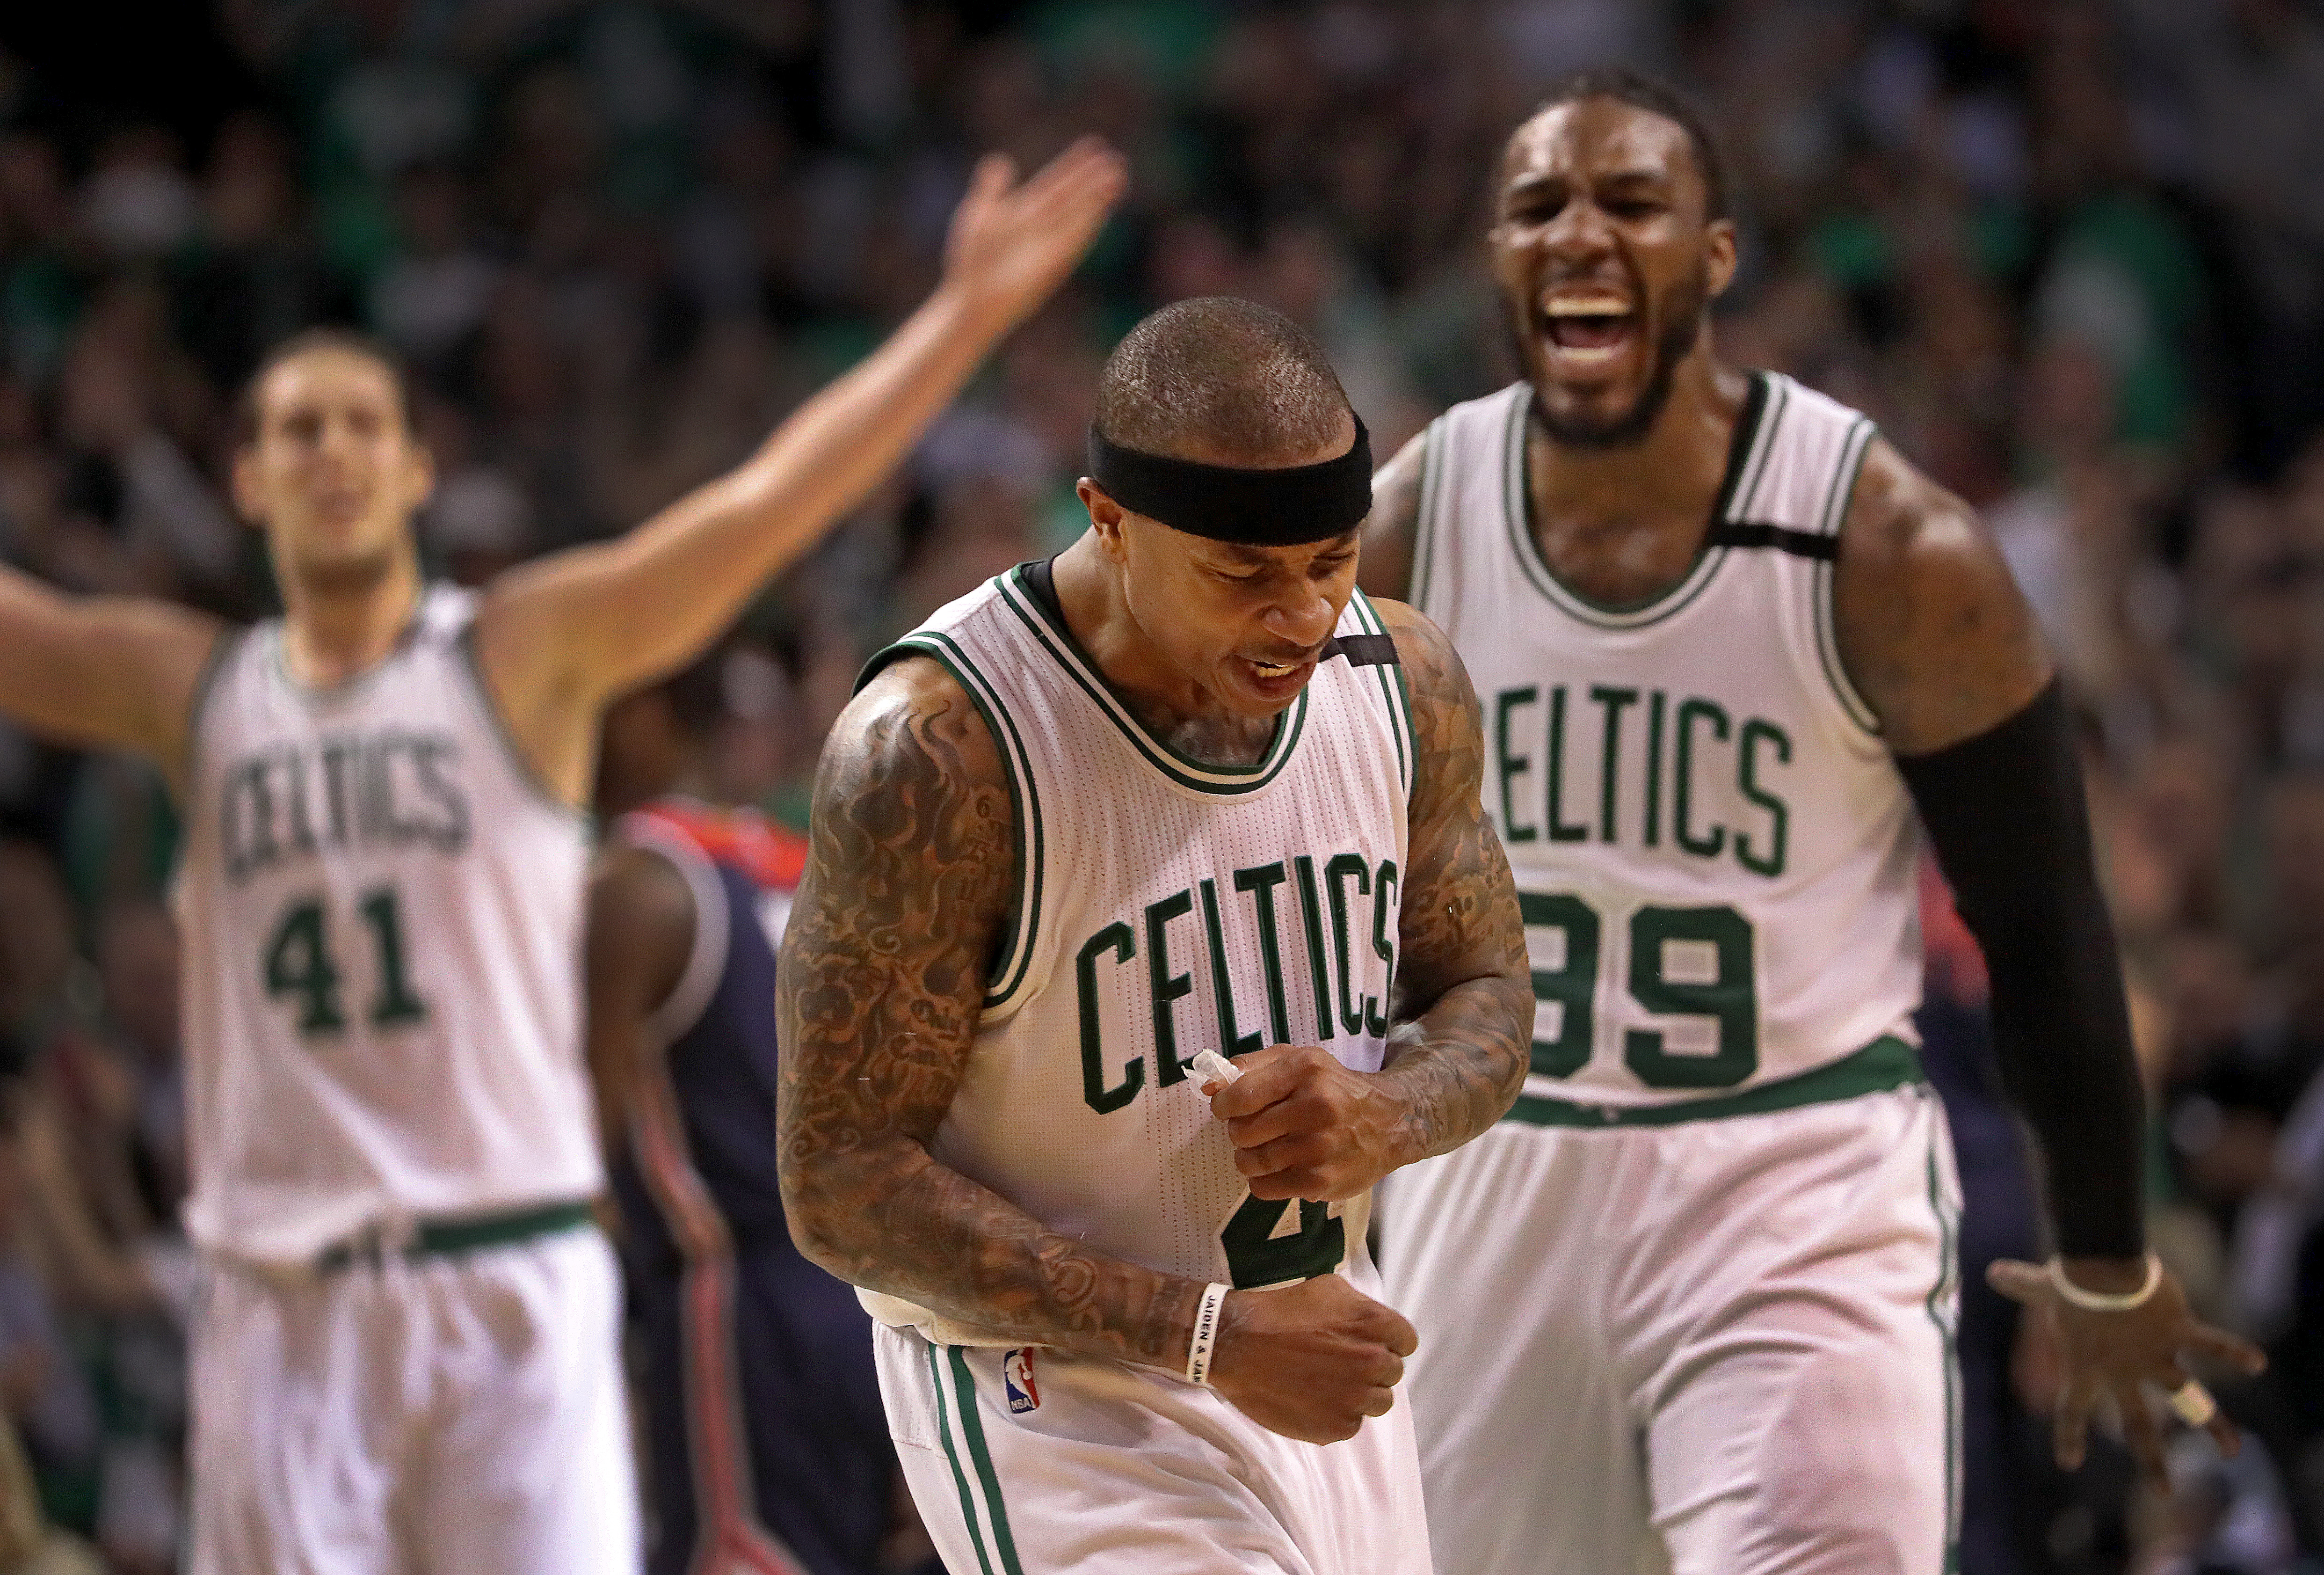 Celtics beat Bucks 112-96 in Game 7, advance to play 76ers